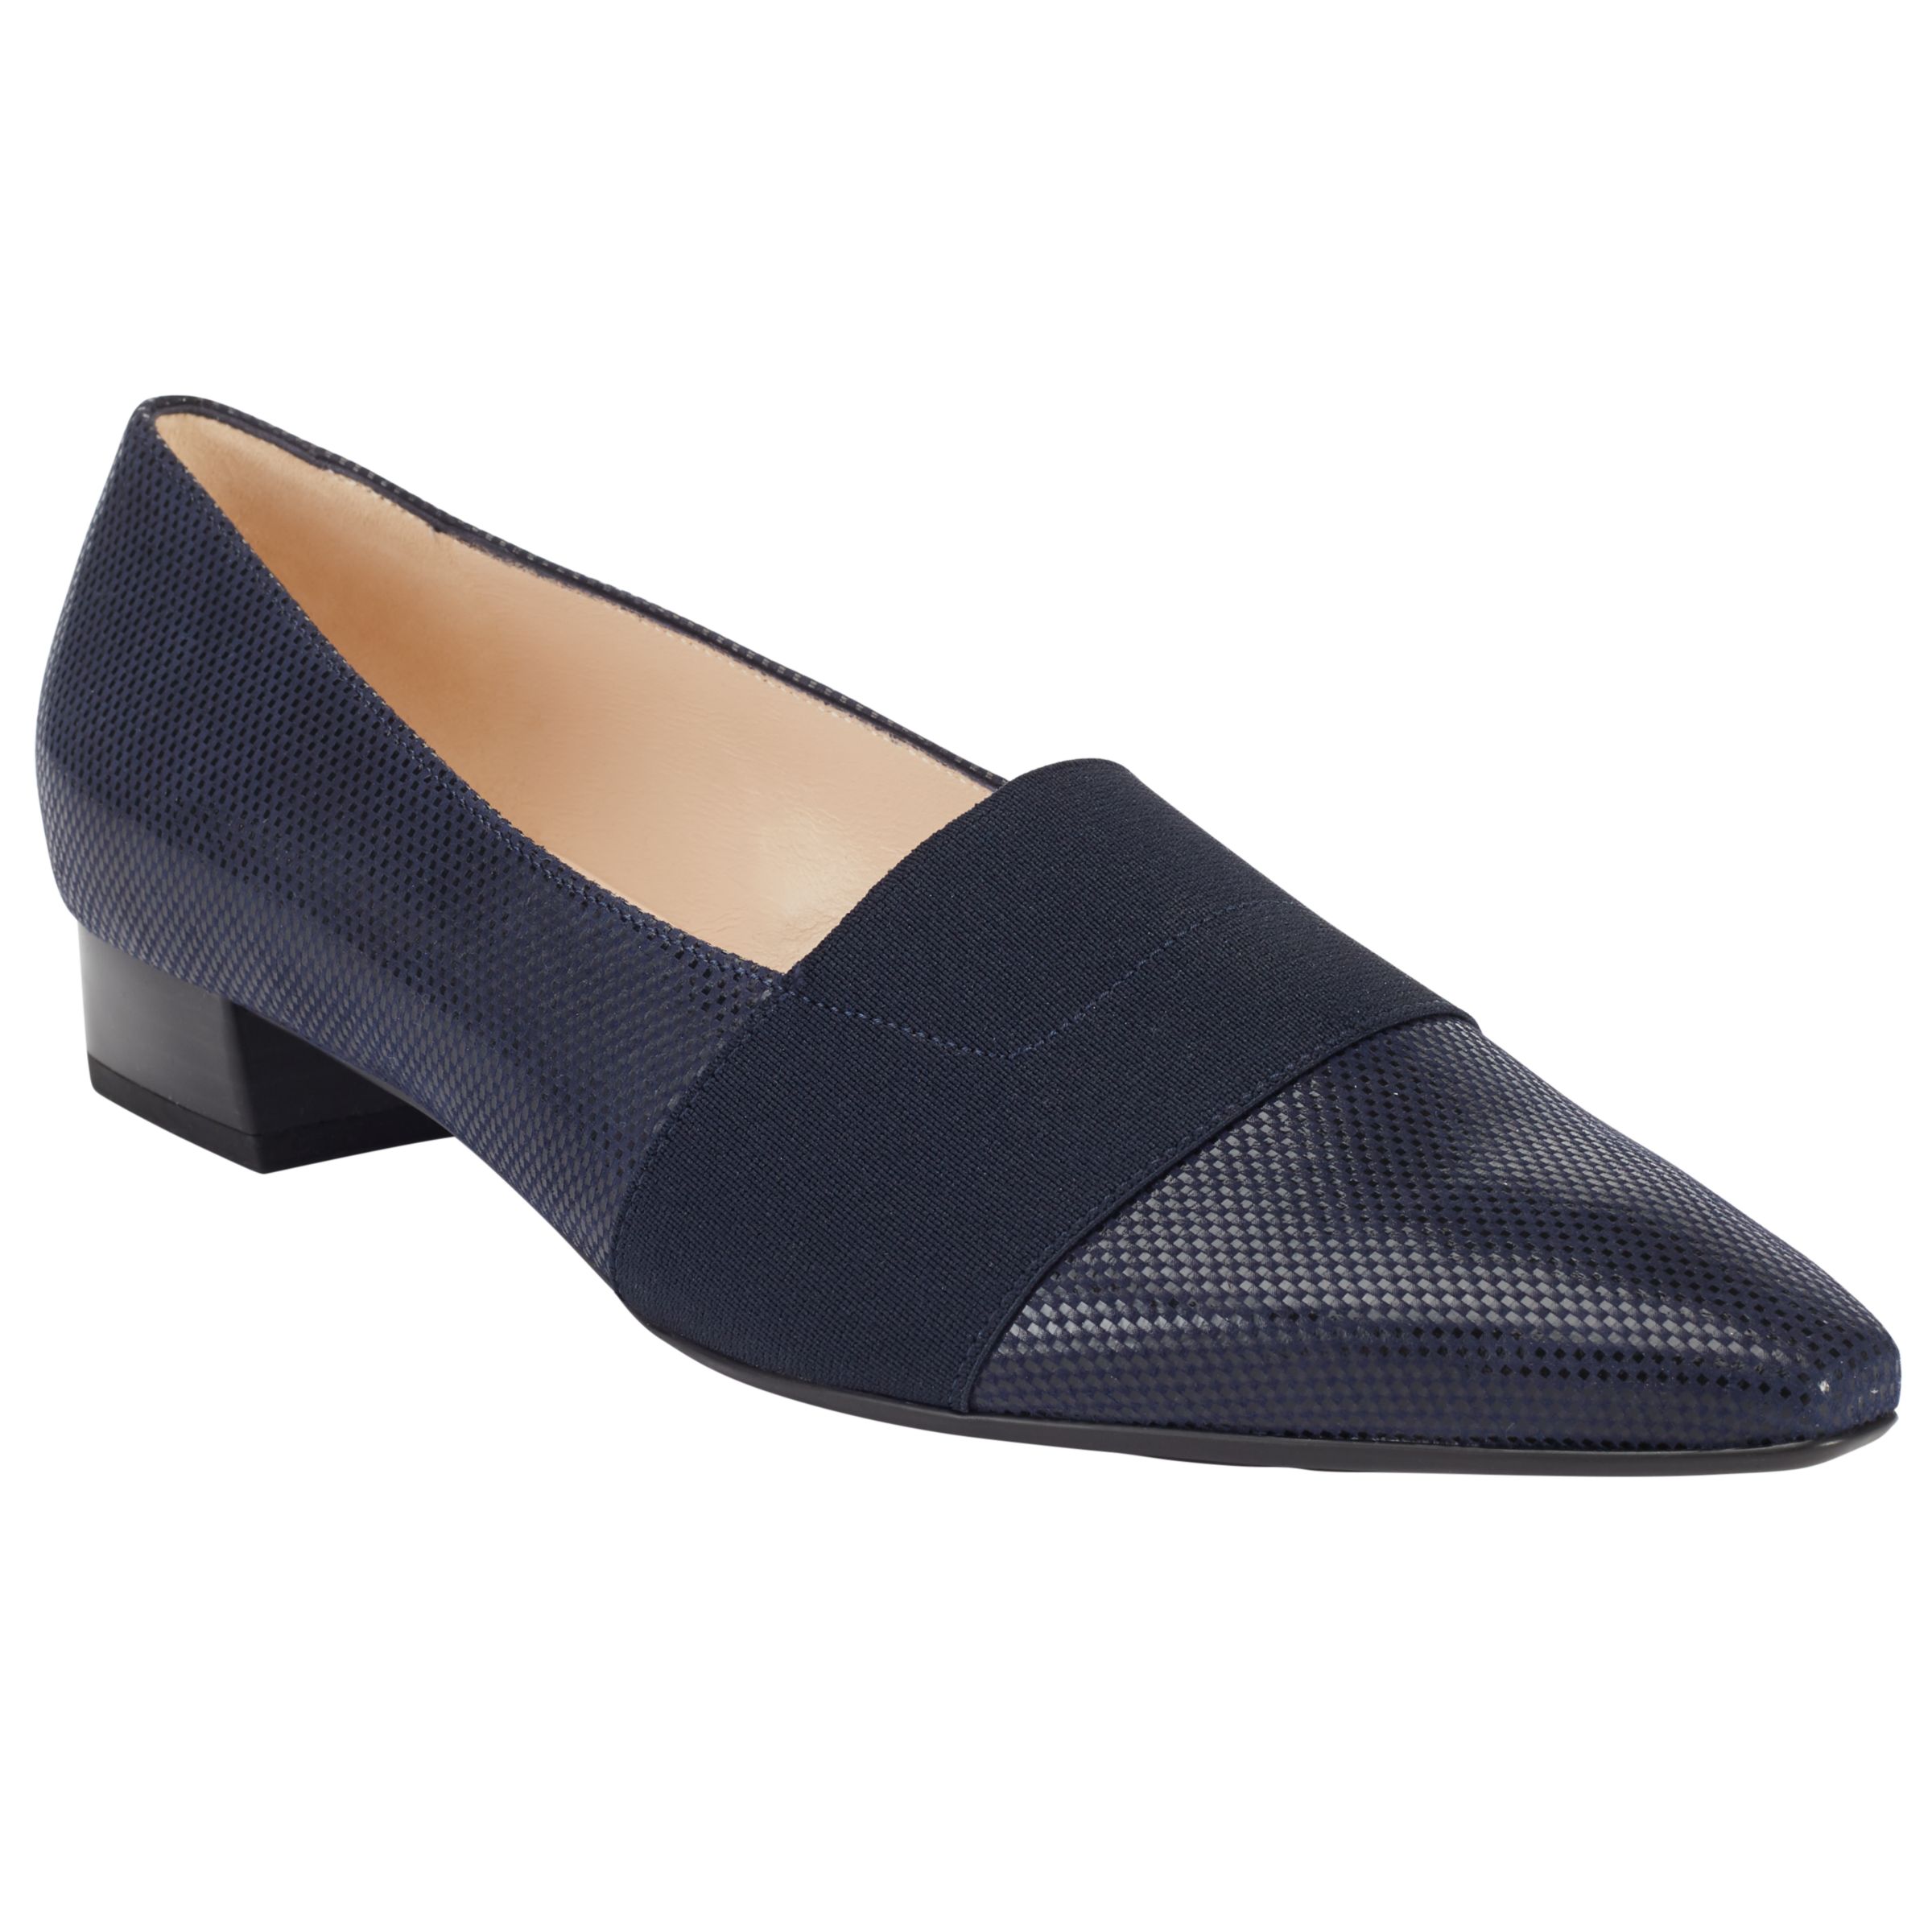 Peter Kaiser Lagos Pointed Toe Court Shoes, Navy Leather at John Lewis ...